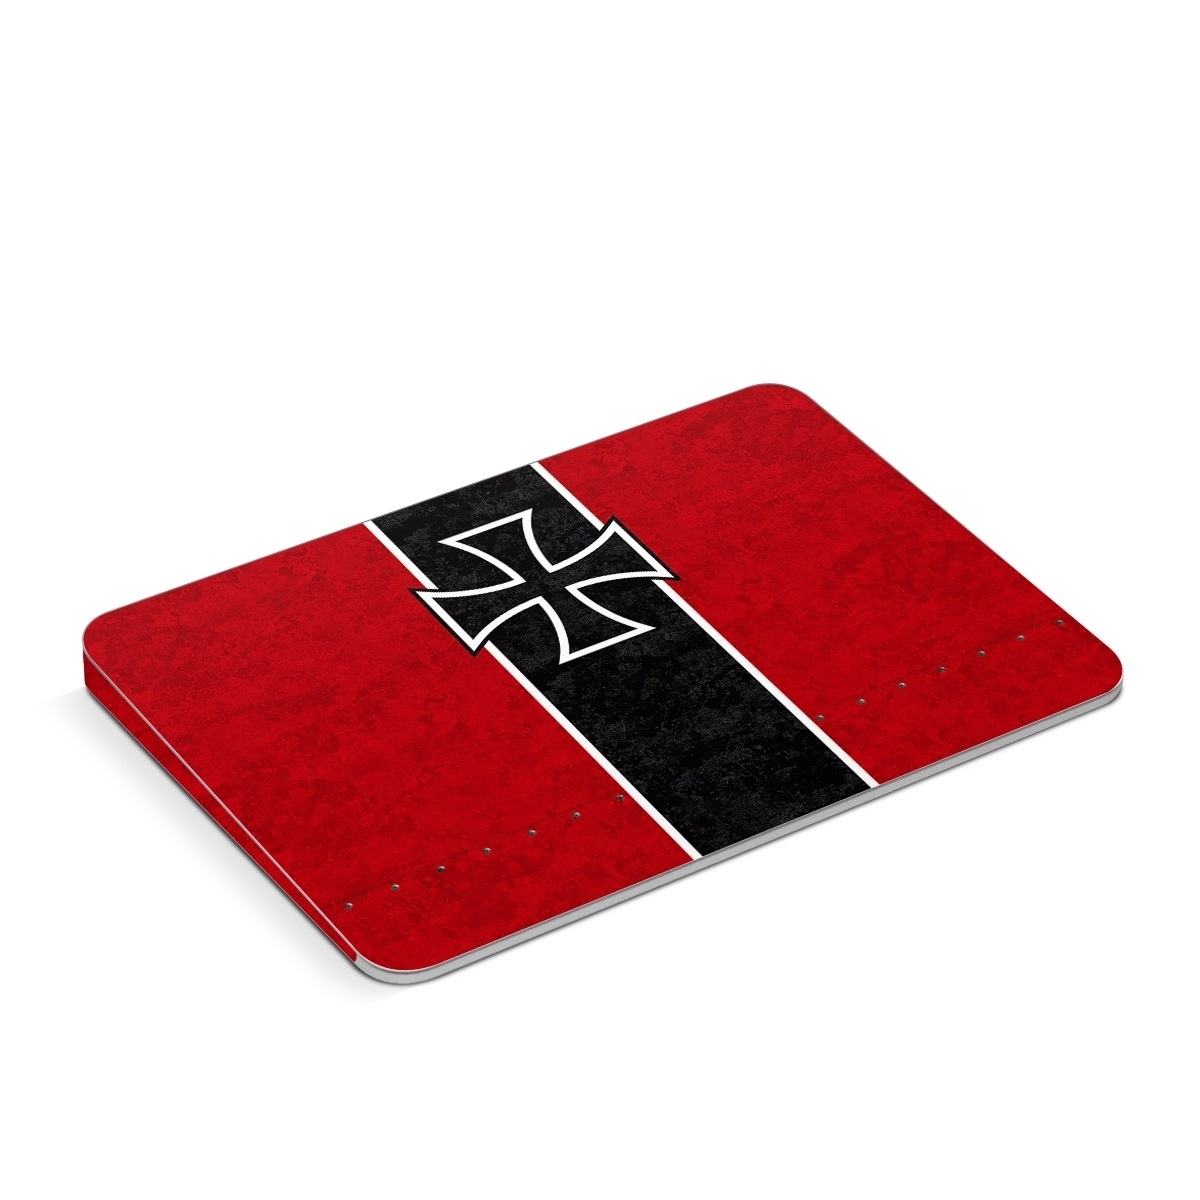 Apple Magic Trackpad Skin design of Bullet, Holes, War, Red, Text, Carmine, Colorfulness, Maroon, Symbol, Coquelicot, with red, black, white, gray colors